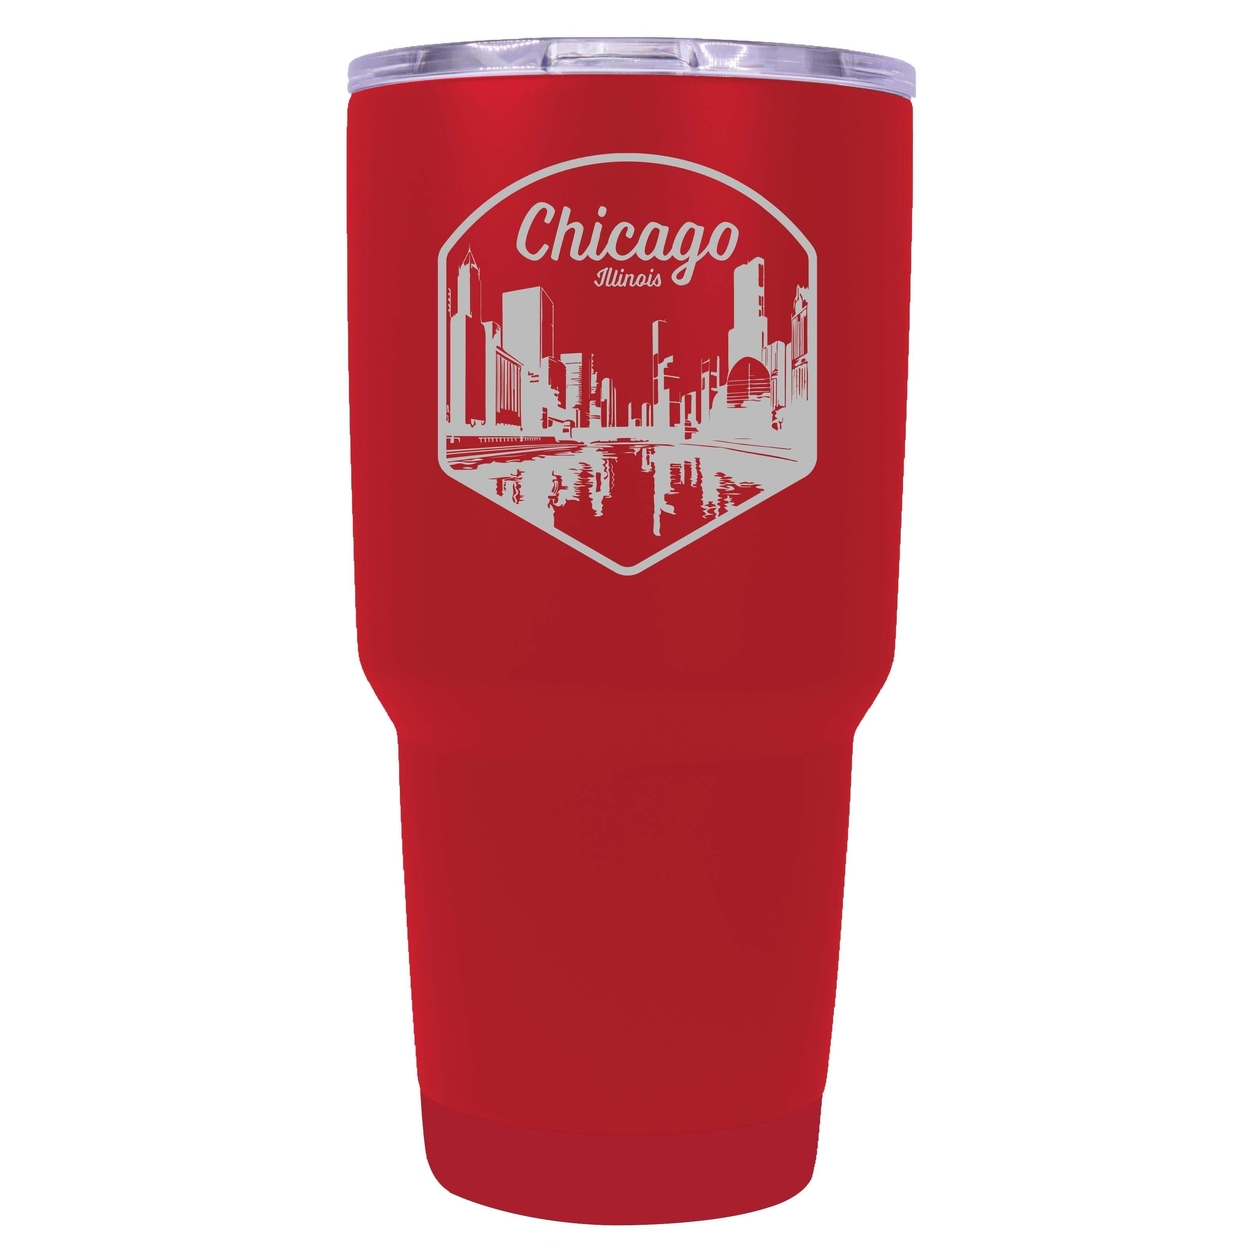 Chicago Illinois Souvenir 24 Oz Engraved Insulated Tumbler - Red,,2-Pack